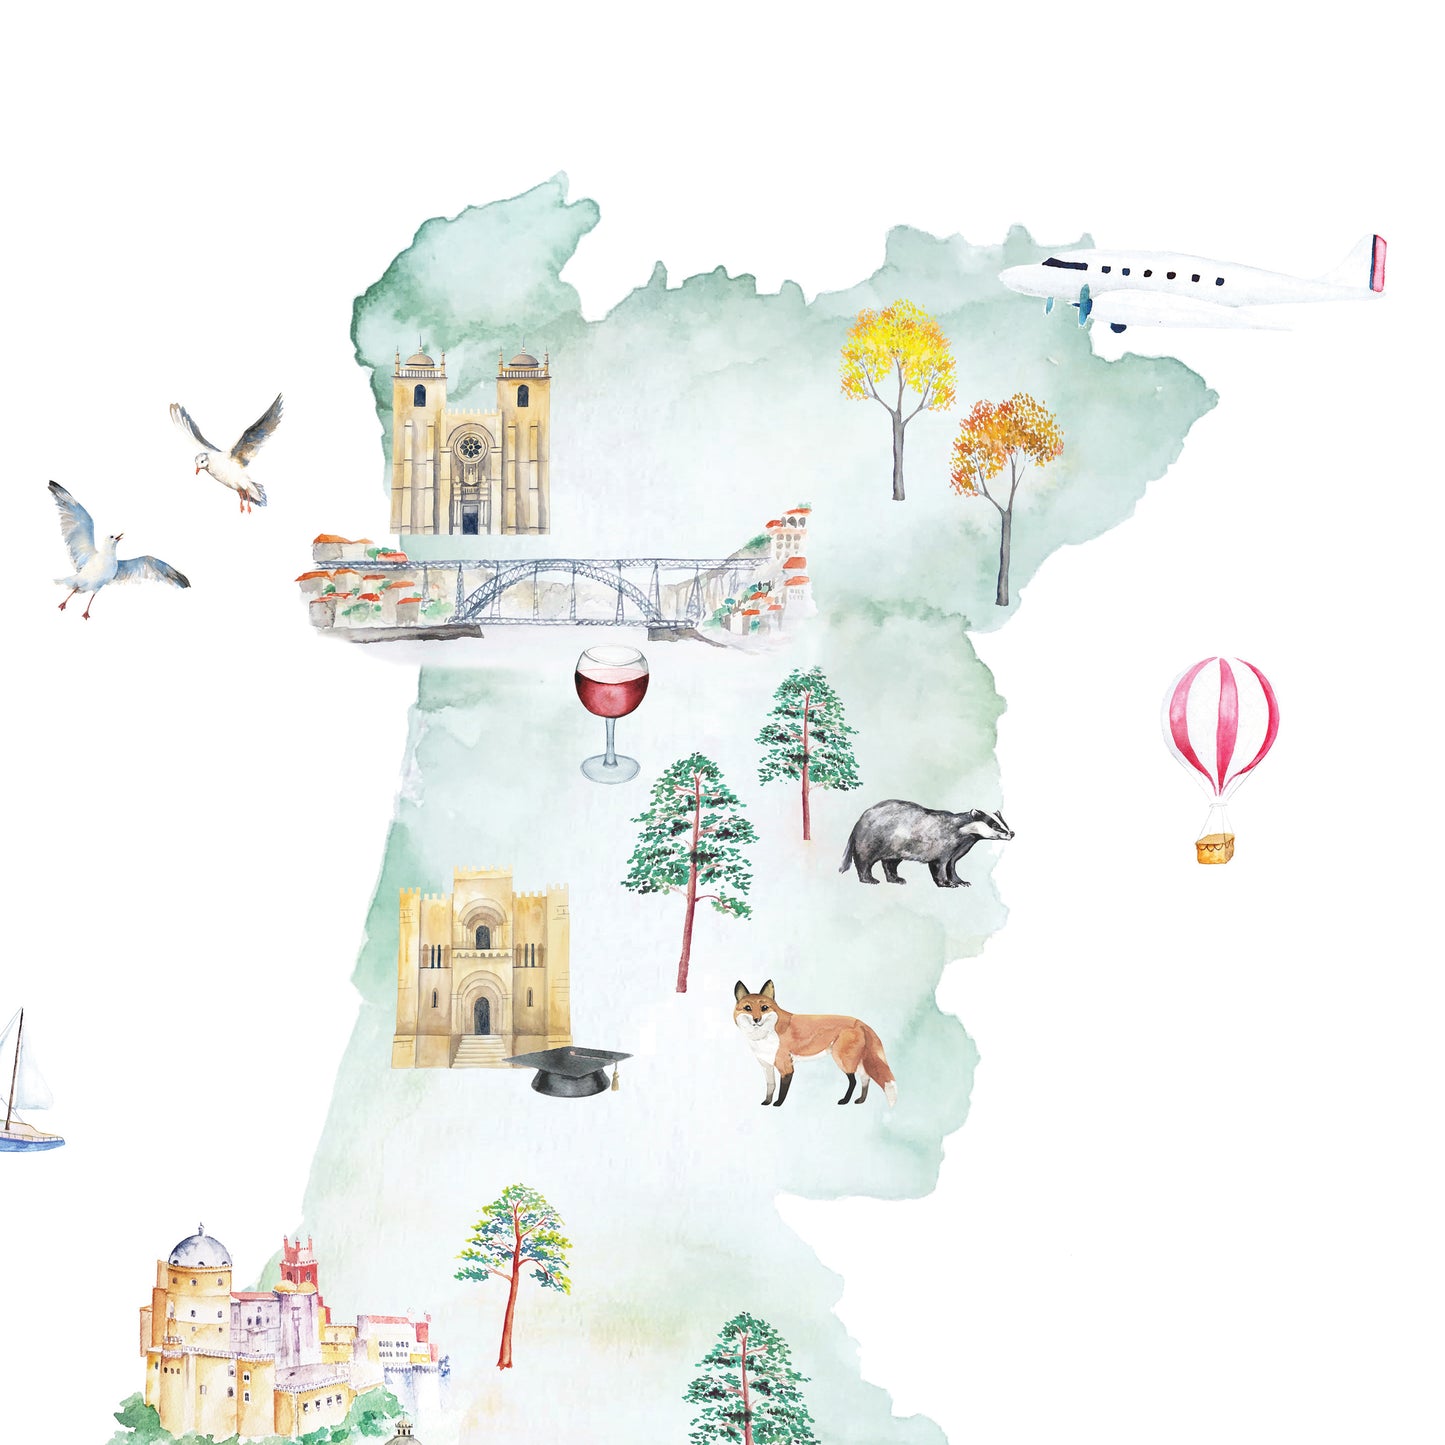 Illustrated map of Portugal with icons, cities, animals, landmarks